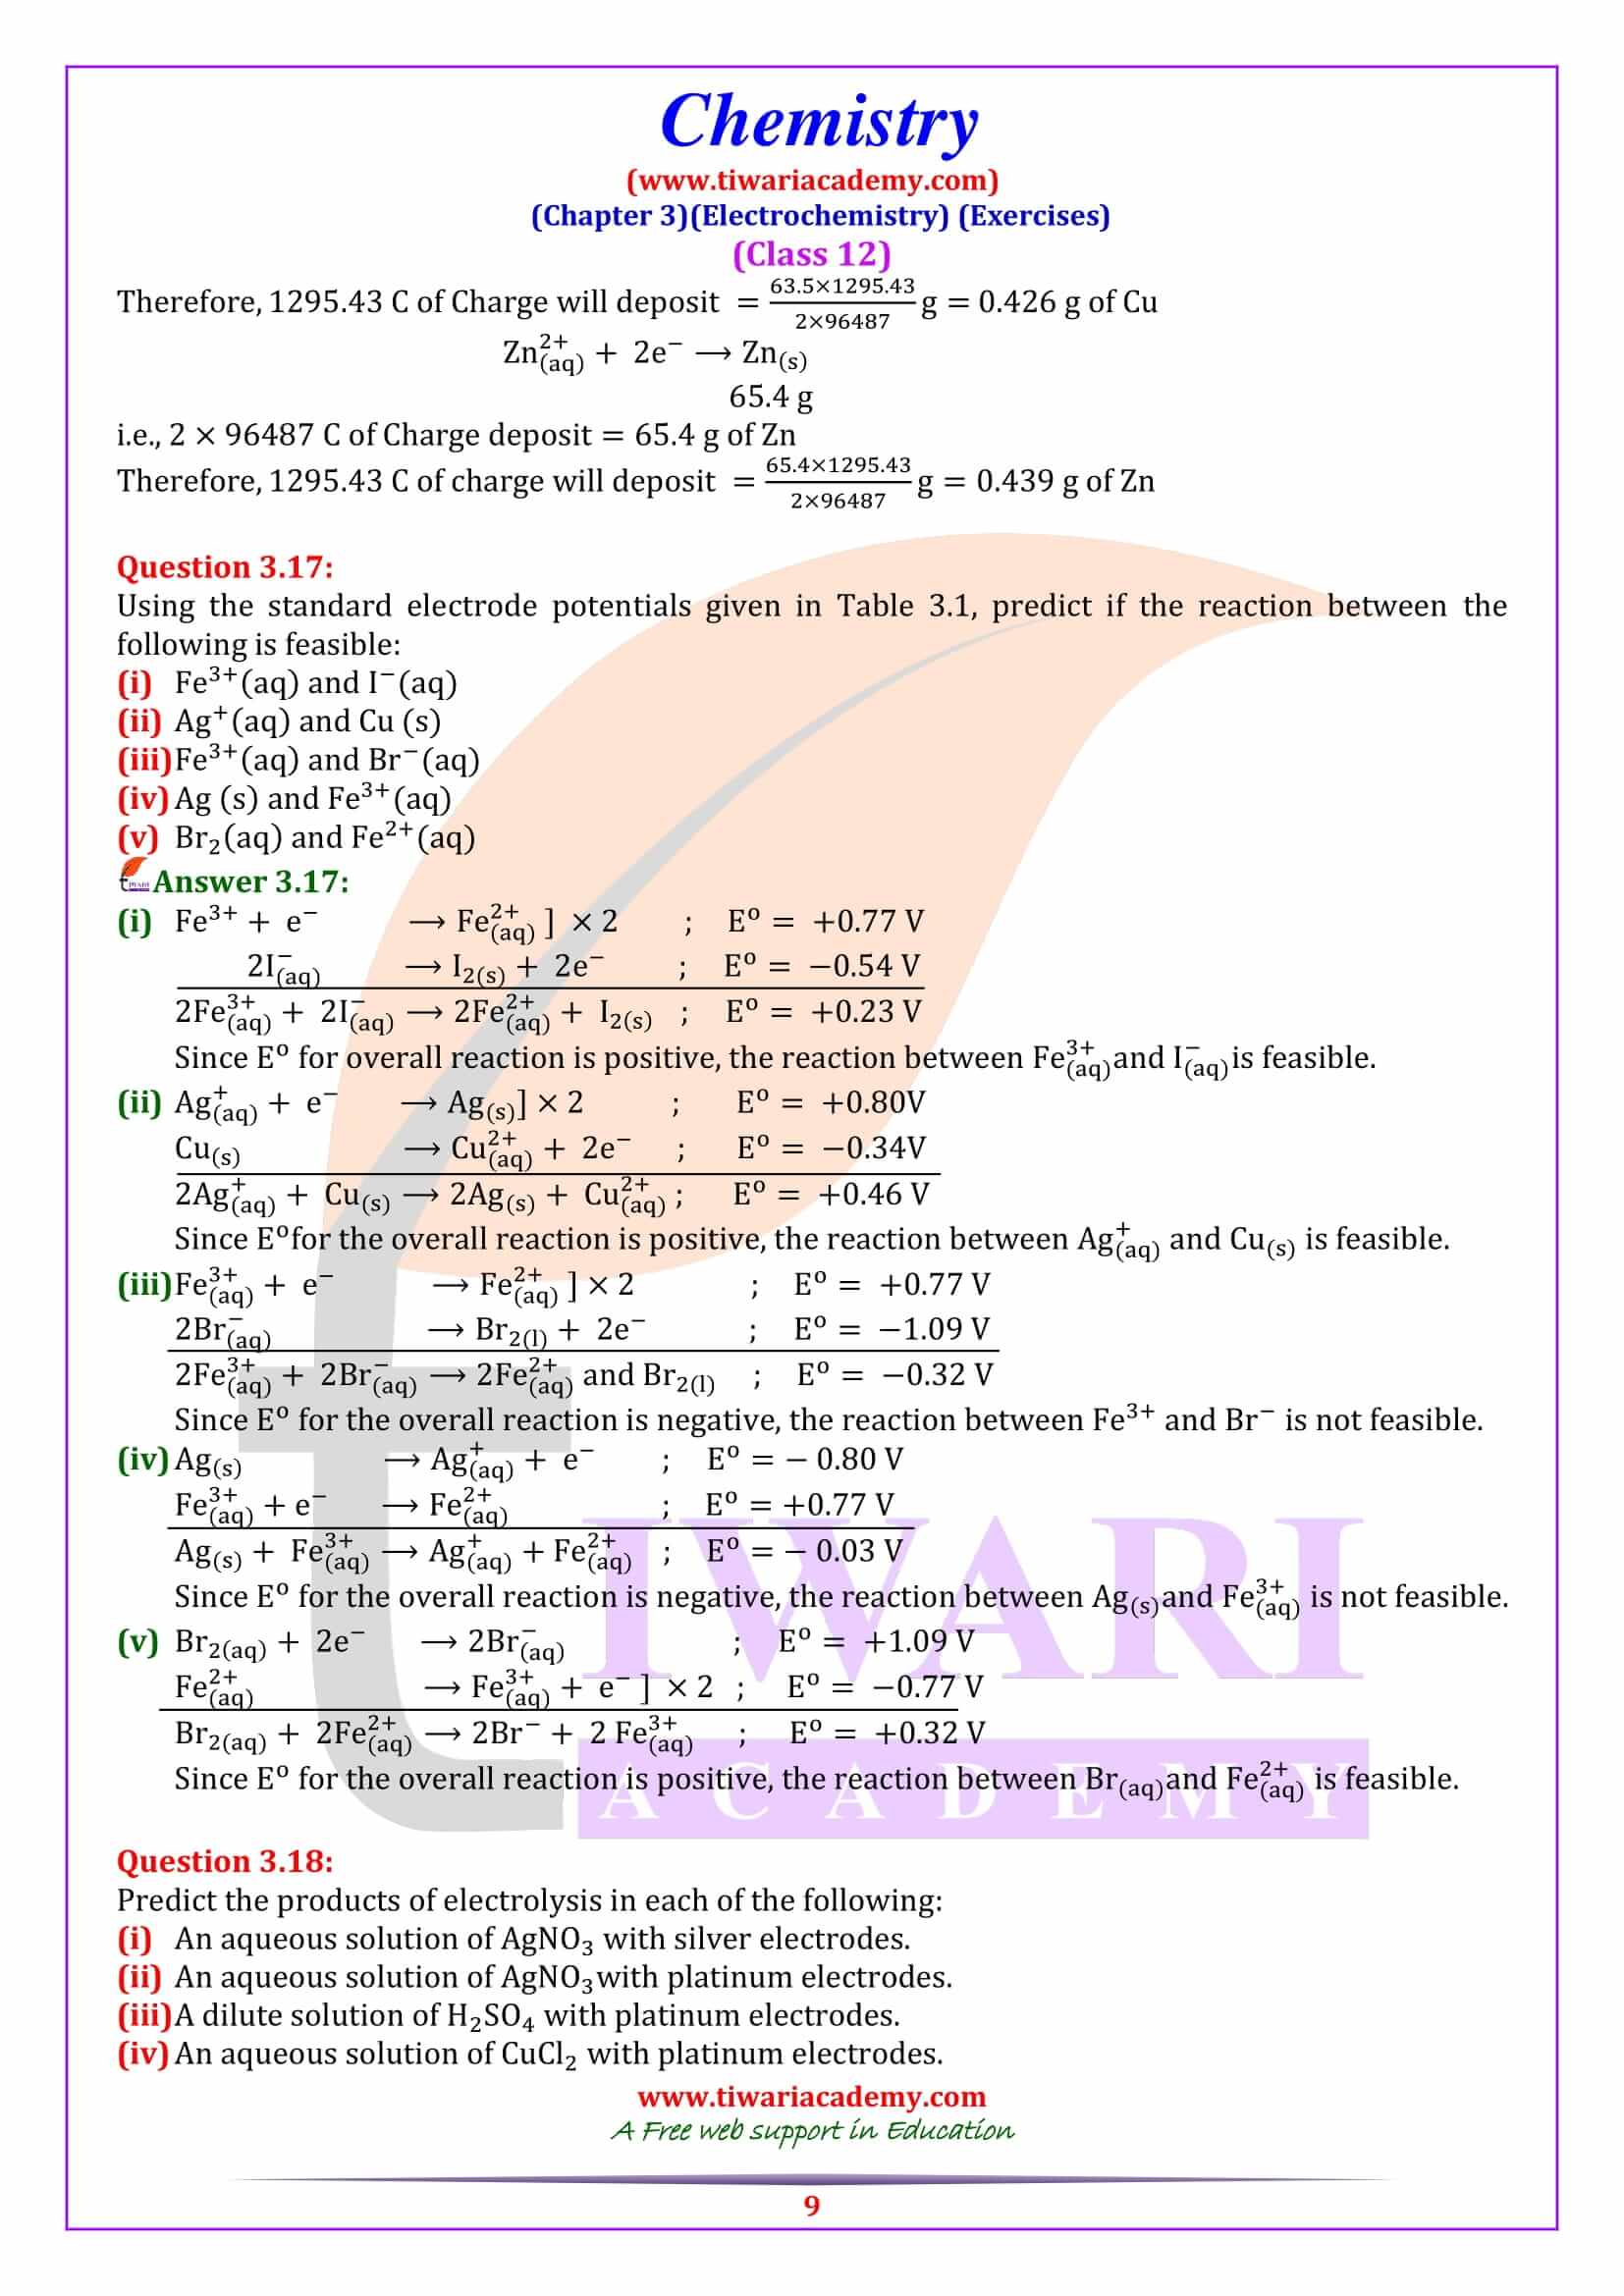 NCERT Solutions for Class 12 Chemistry Chapter 3 free download